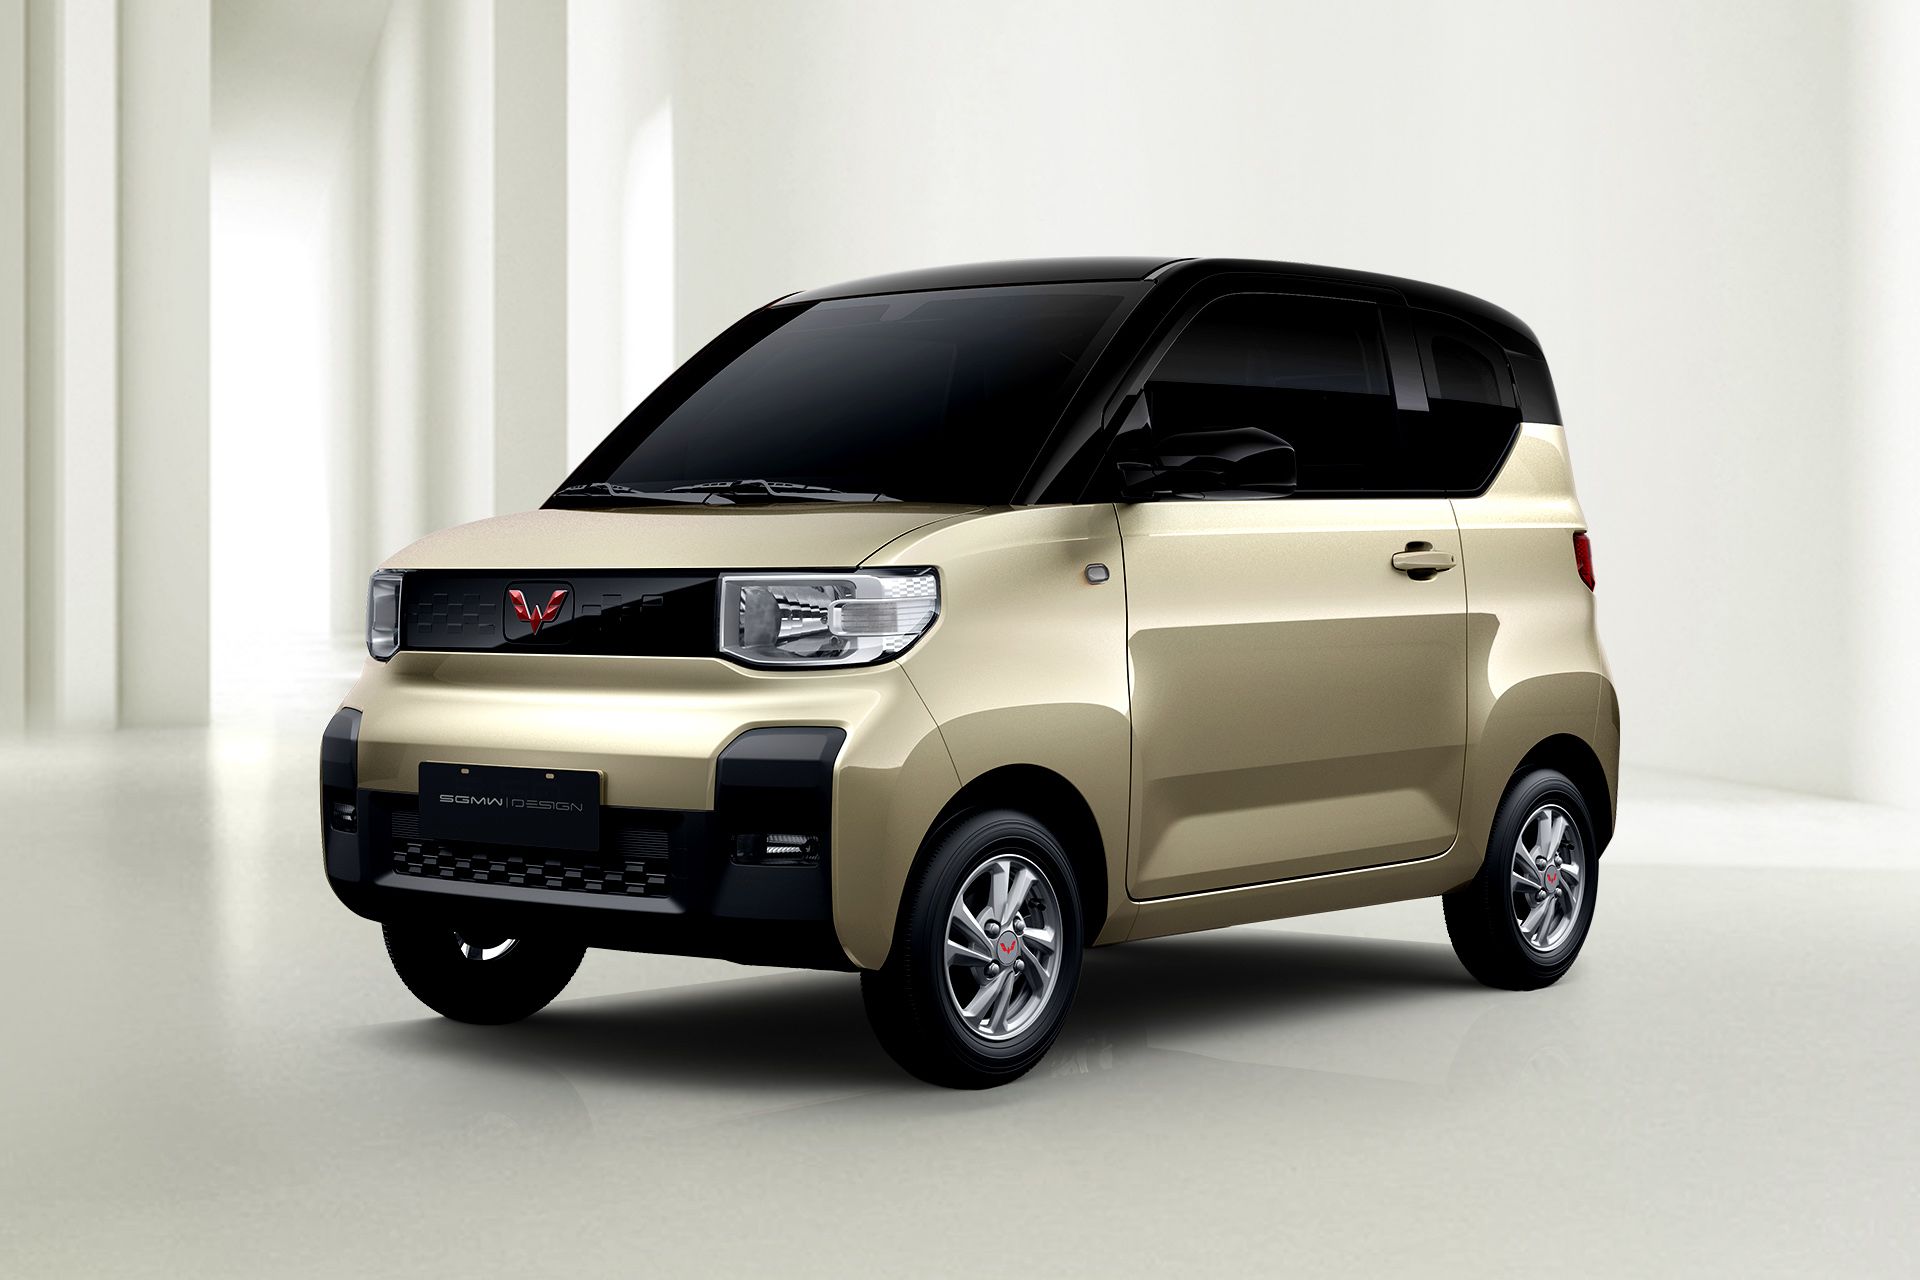 GM's Latest EV comes from China's Wuling